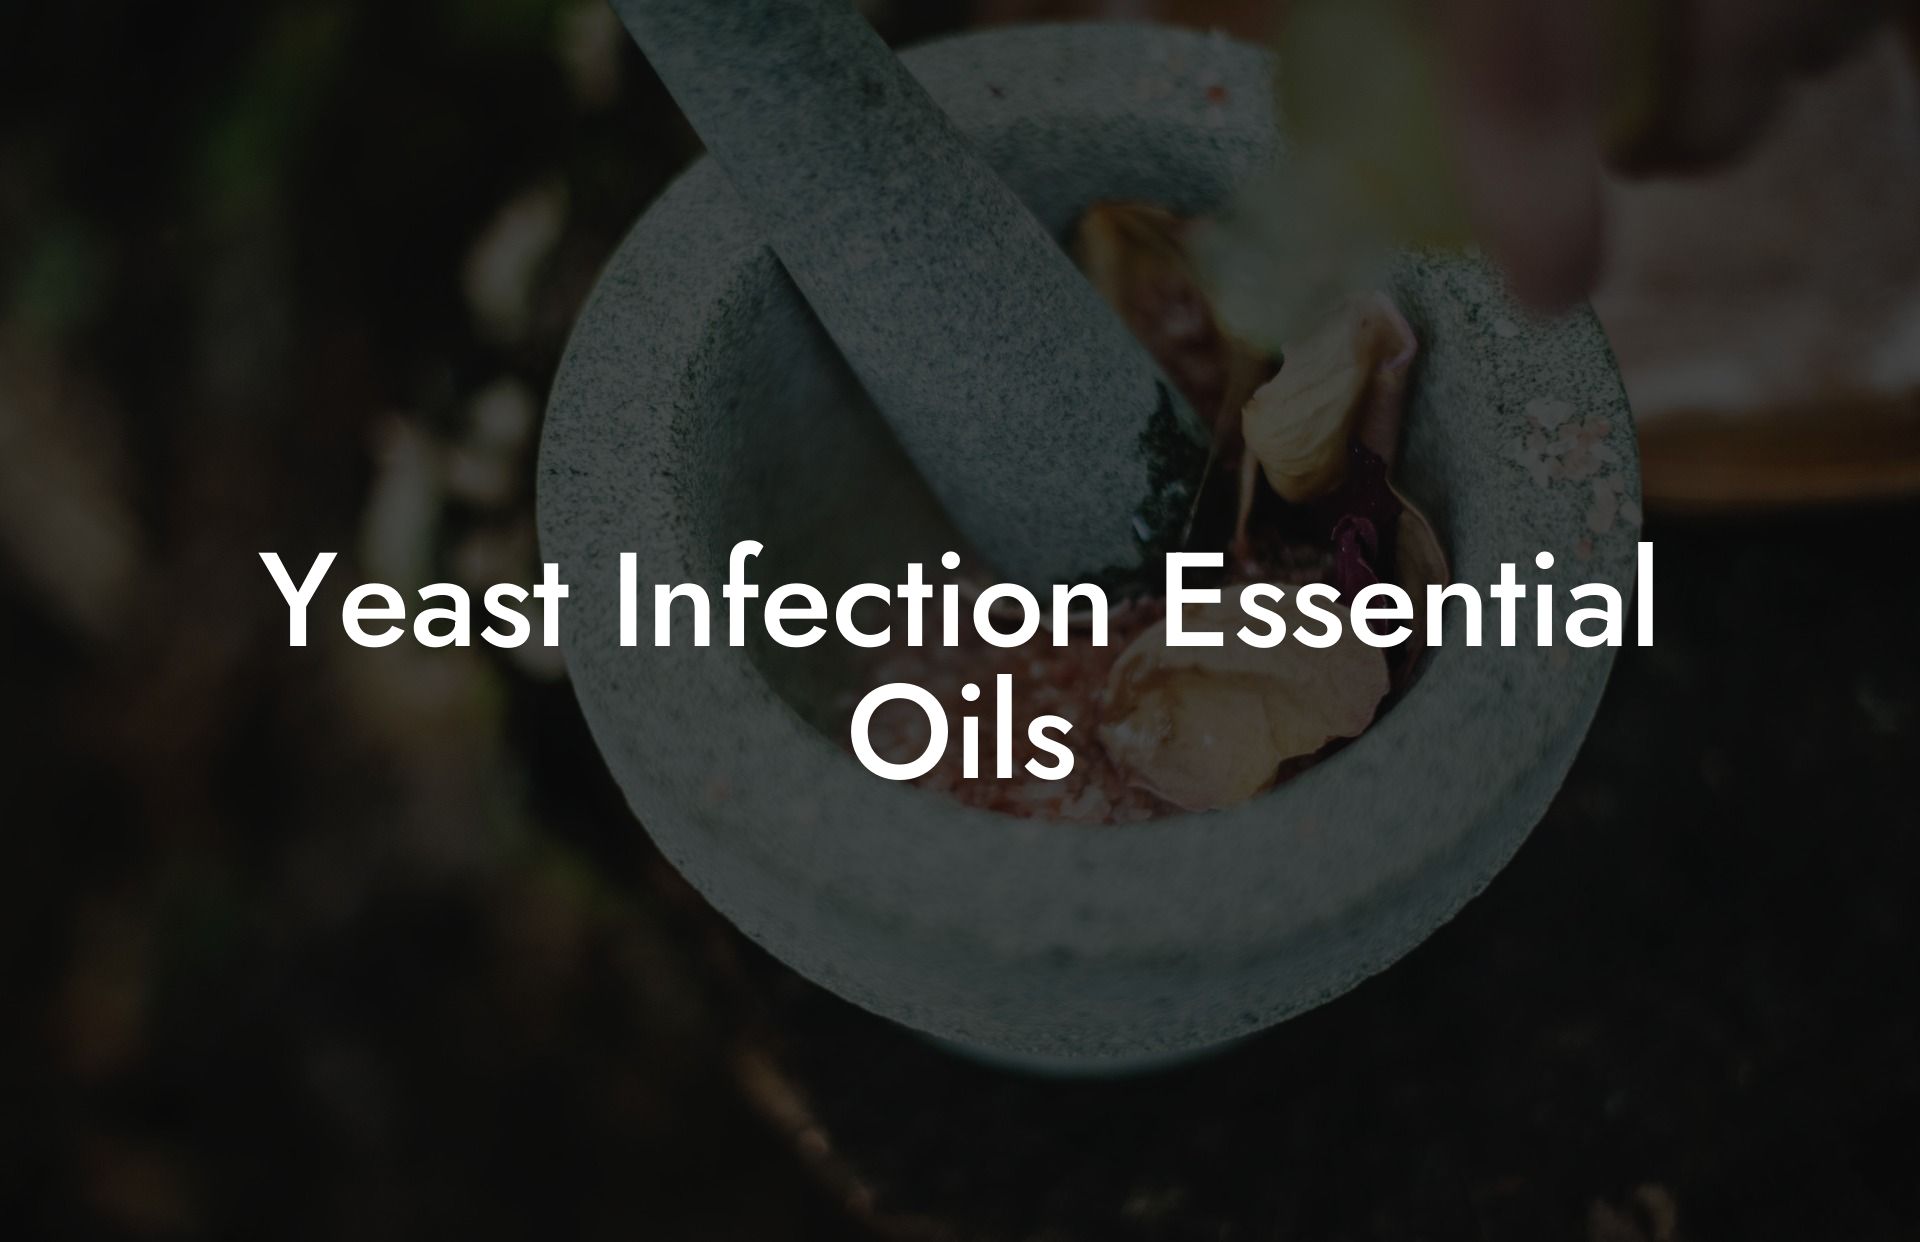 Yeast Infection Essential Oils